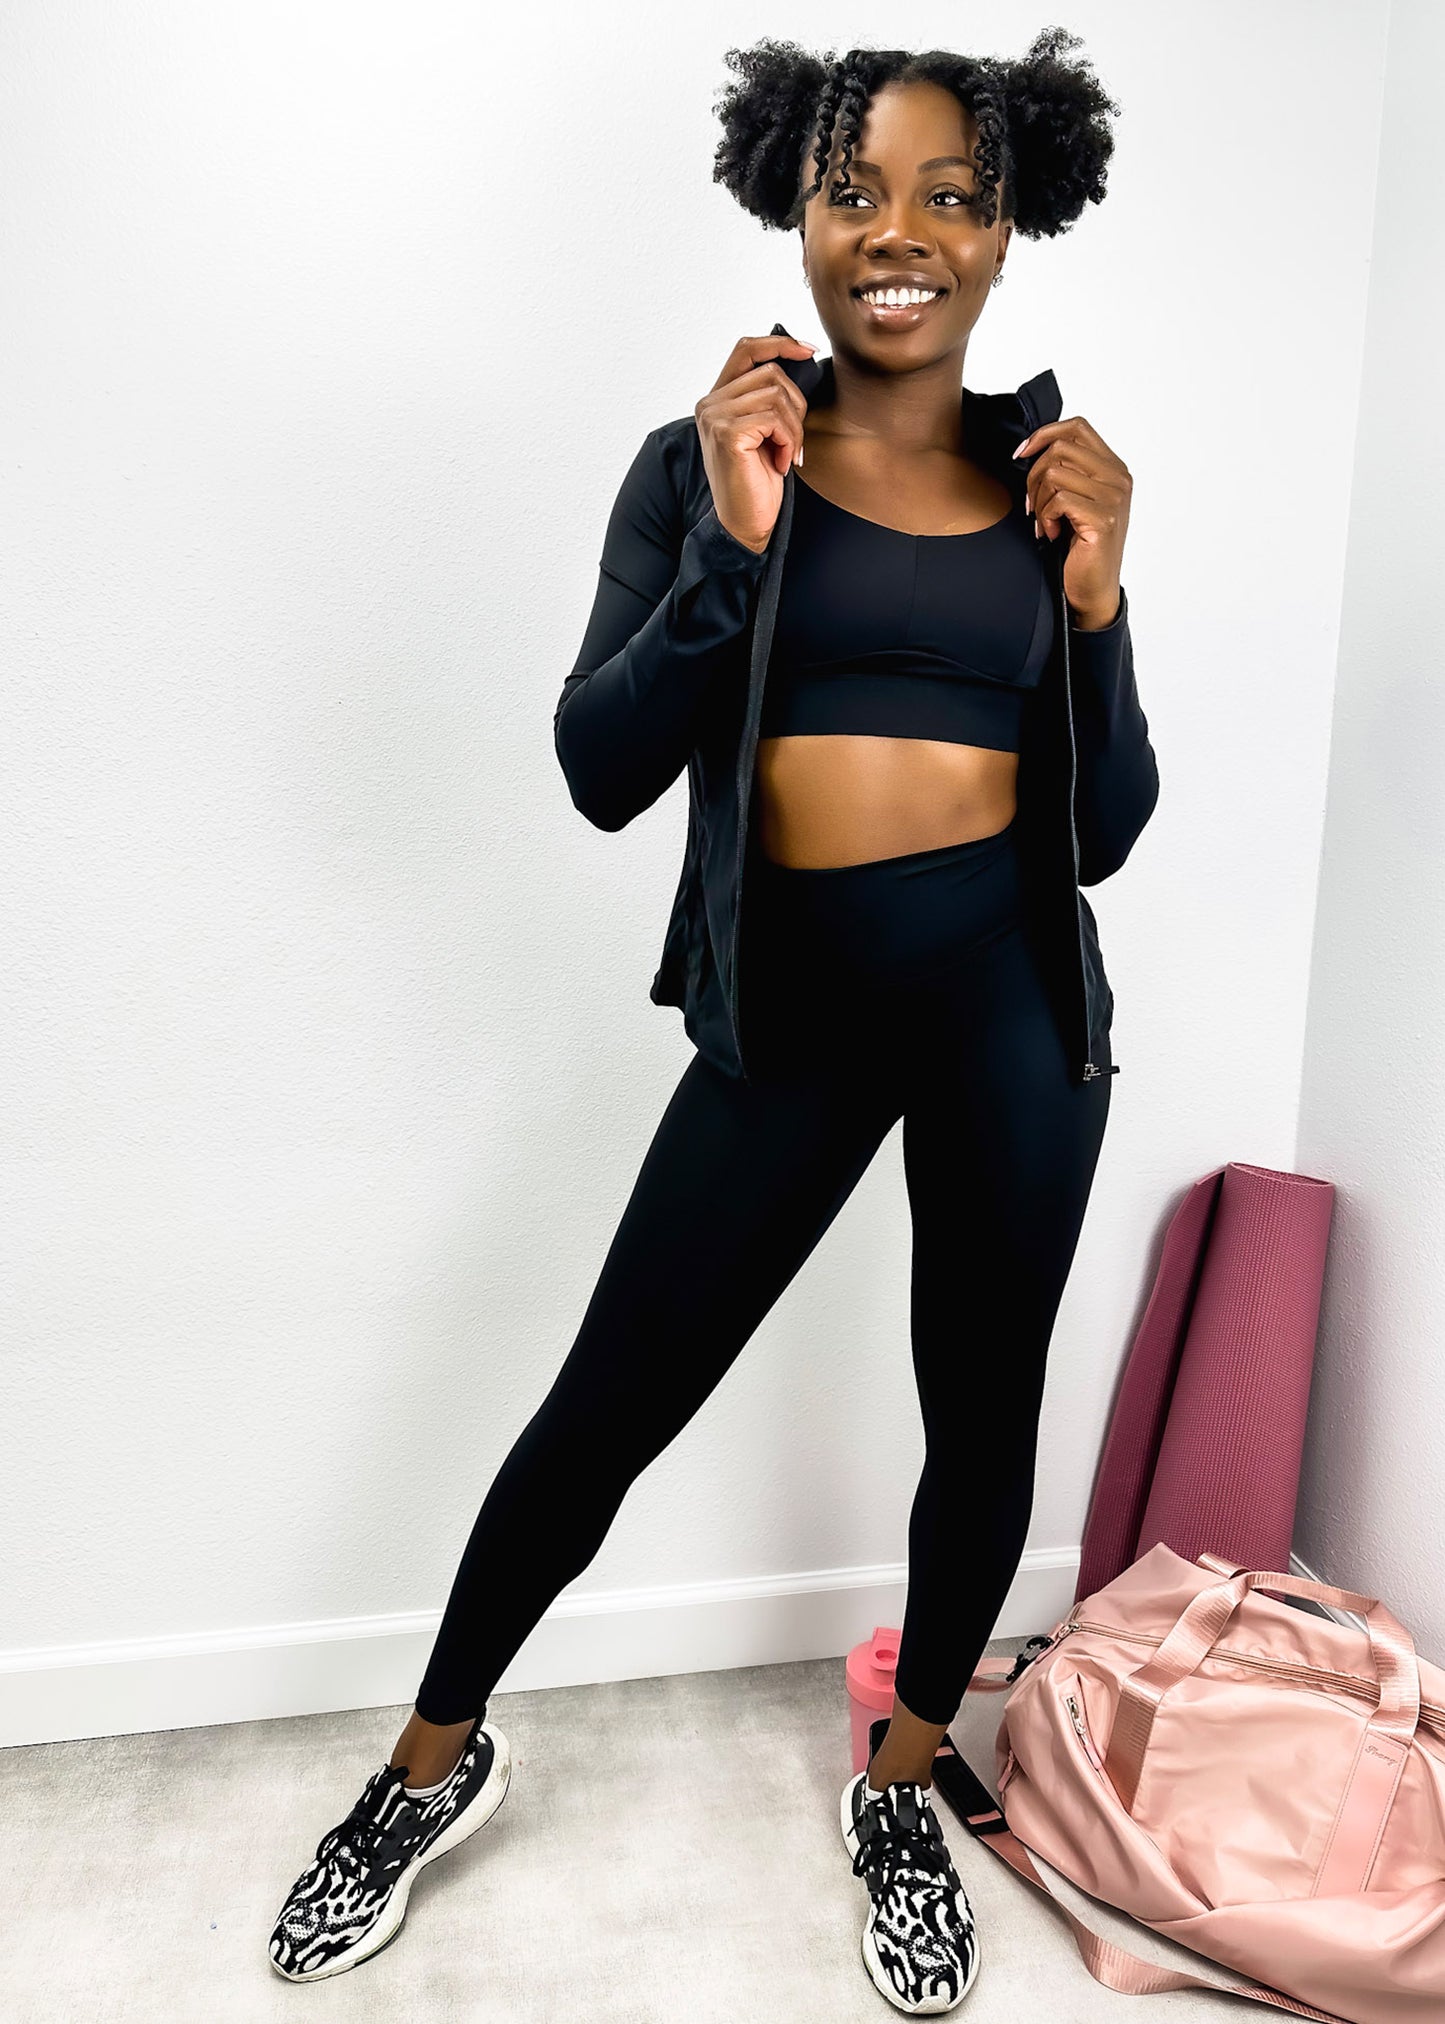 Three-Piece Hooded Zip Jacket, Sports Bra, and High-Rise Yoga